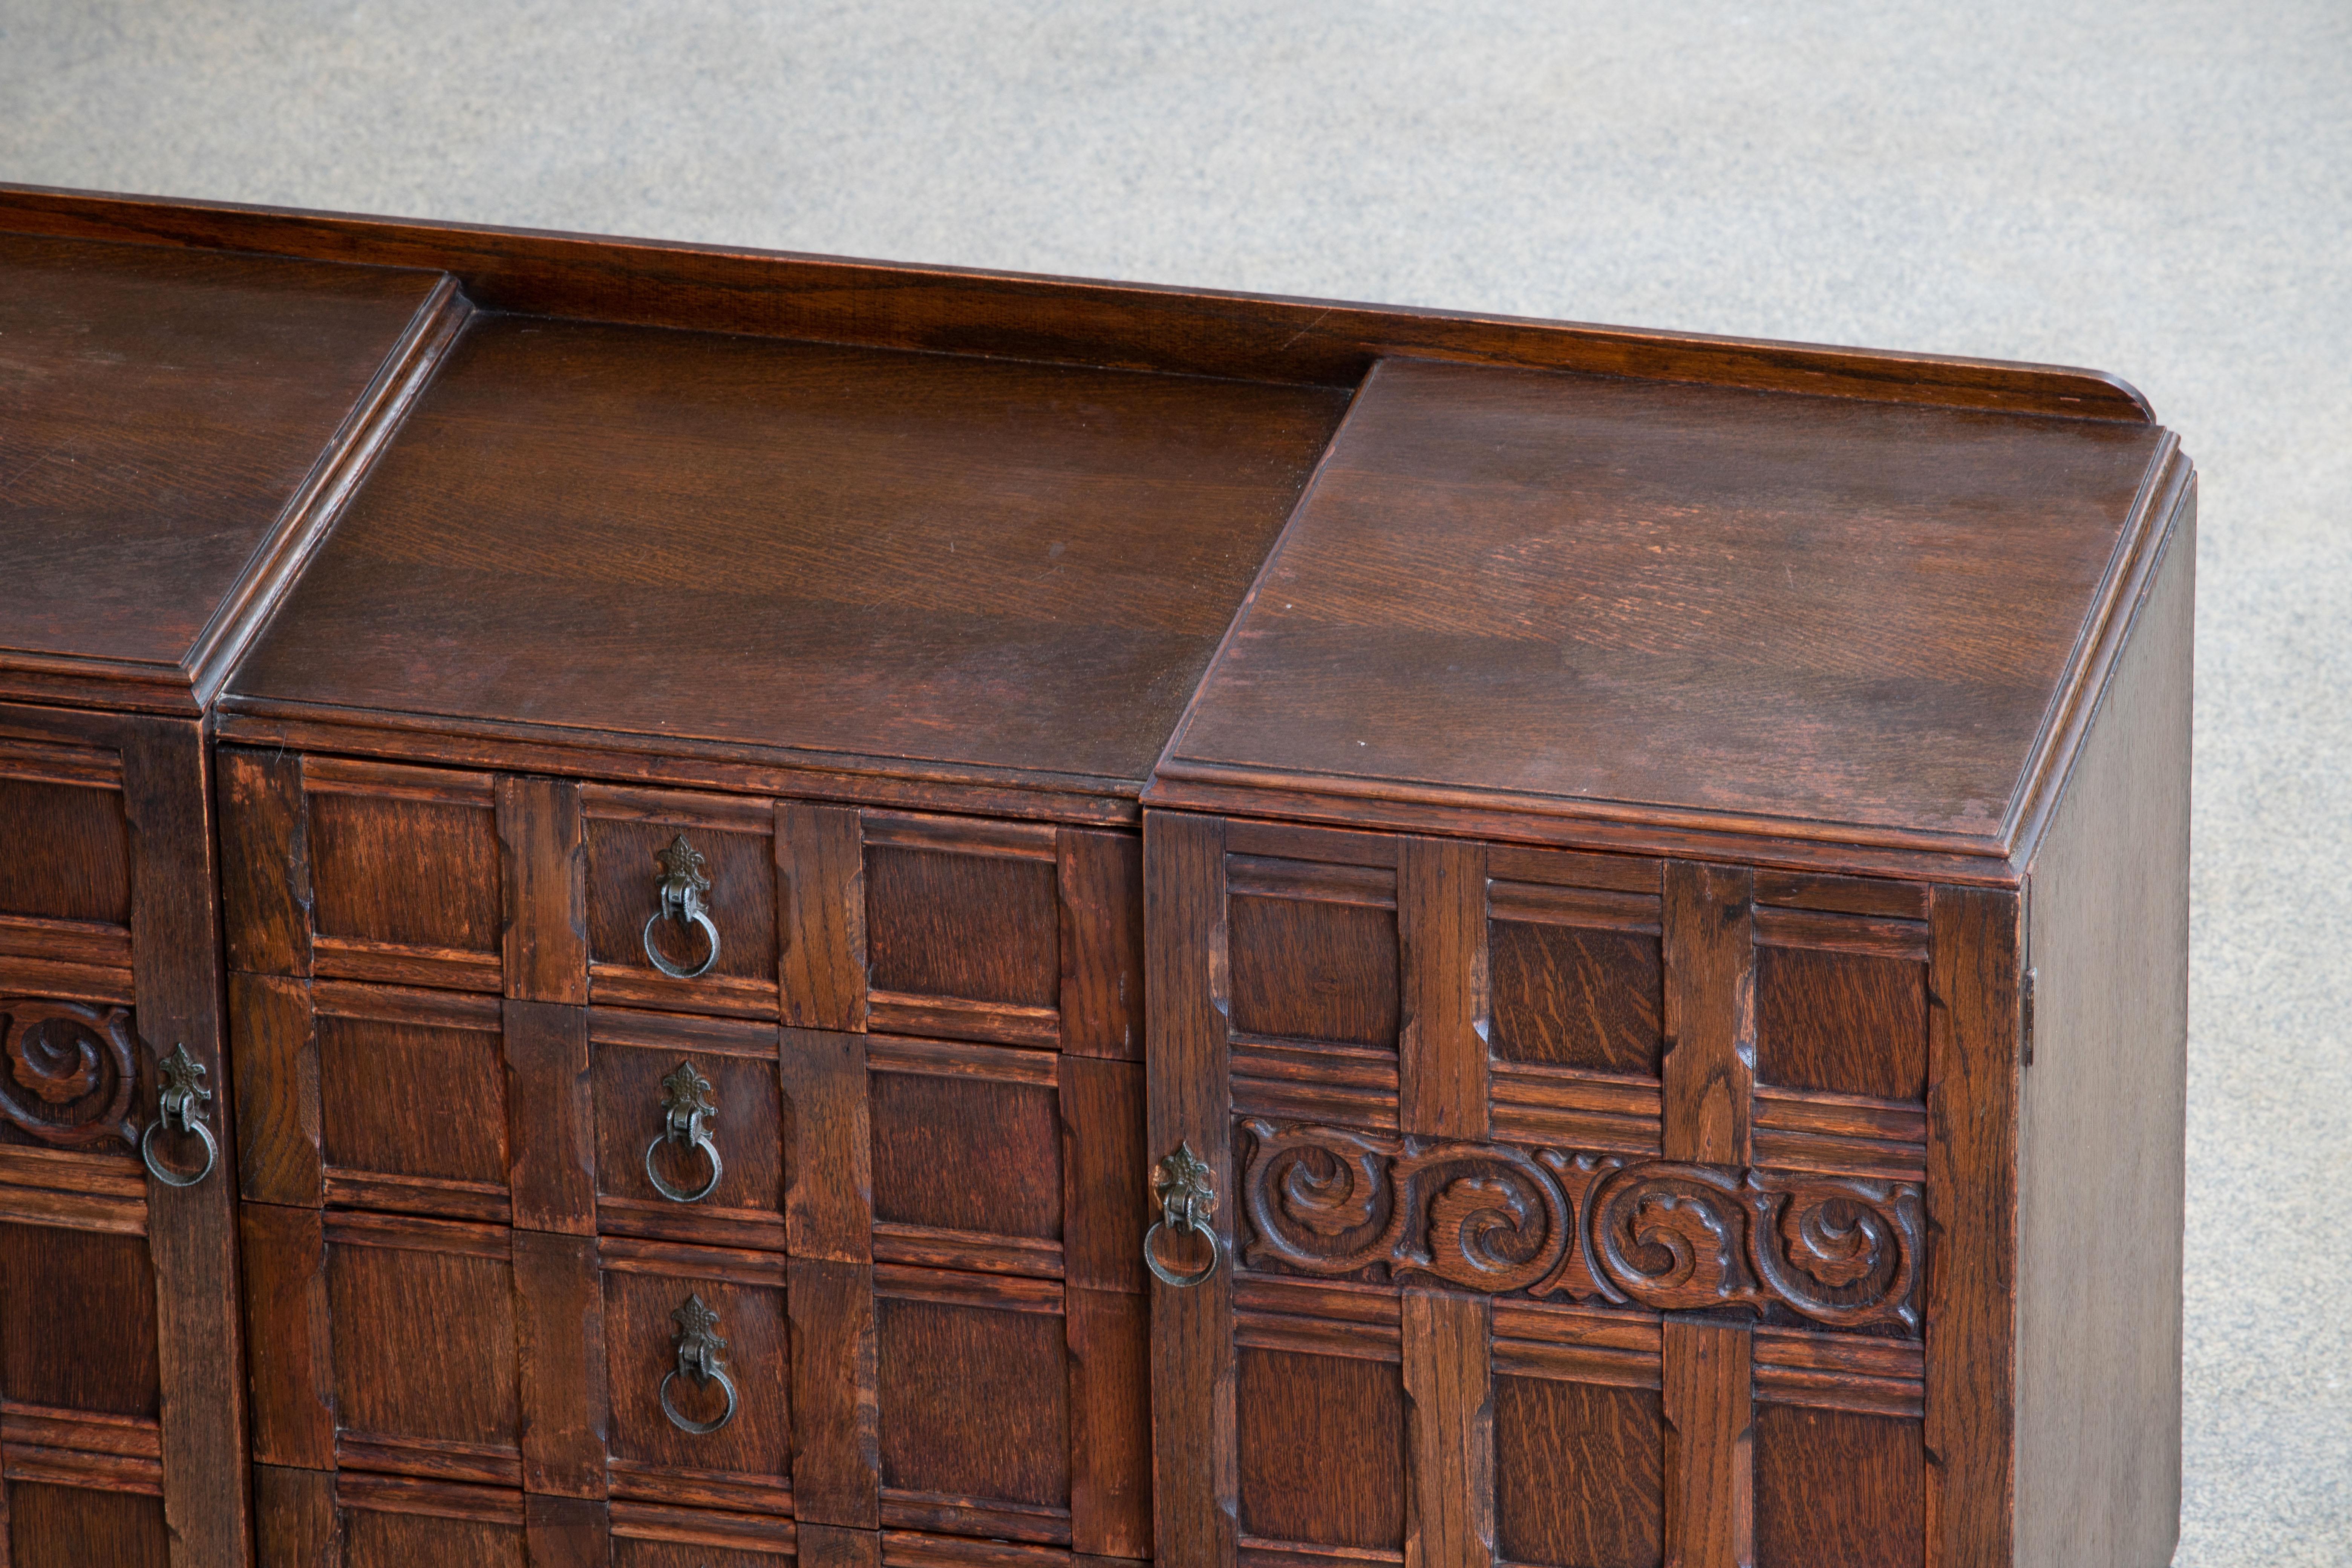 Spanish Colonial 20th Century Spanish Baroque Style Oak Sideboard, Cabinet